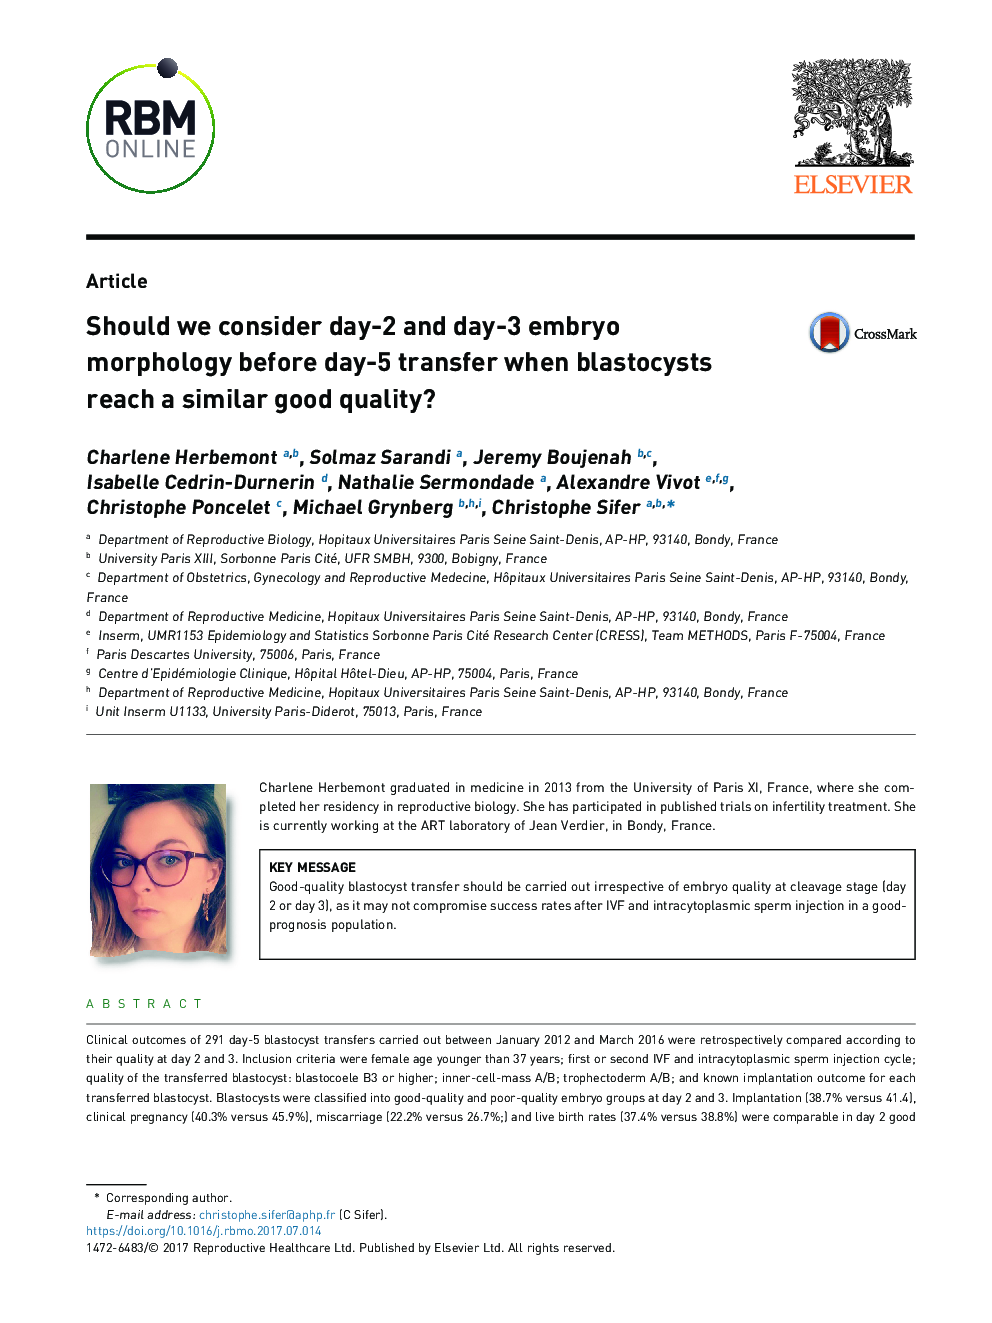 Should we consider day-2 and day-3 embryo morphology before day-5 transfer when blastocysts reach a similar good quality?